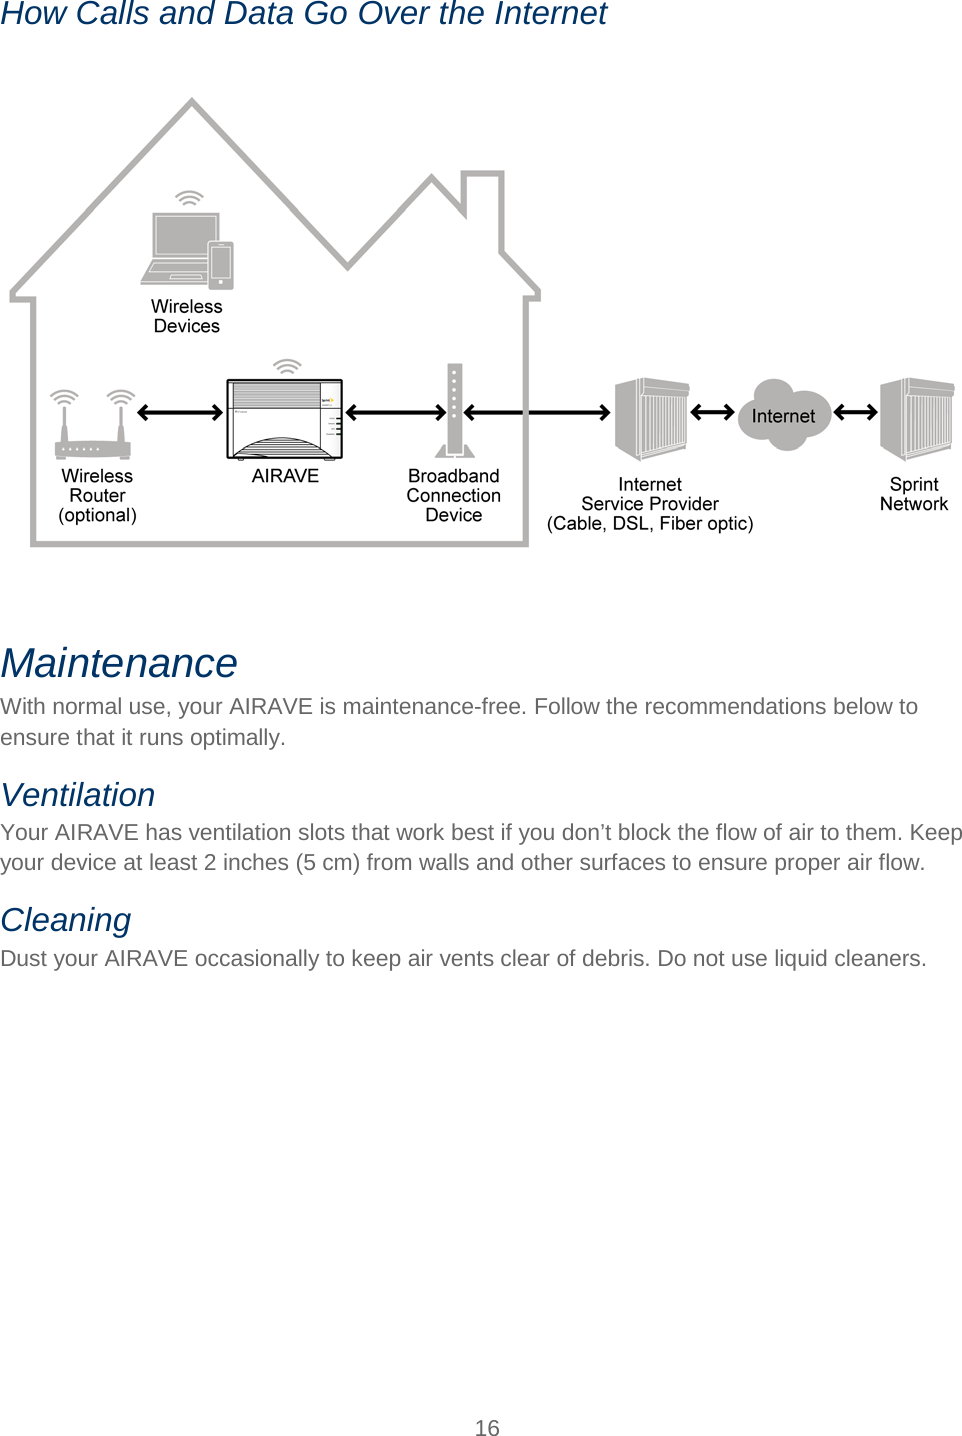   16   How Calls and Data Go Over the Internet    Maintenance With normal use, your AIRAVE is maintenance-free. Follow the recommendations below to ensure that it runs optimally. Ventilation Your AIRAVE has ventilation slots that work best if you don’t block the flow of air to them. Keep your device at least 2 inches (5 cm) from walls and other surfaces to ensure proper air flow. Cleaning Dust your AIRAVE occasionally to keep air vents clear of debris. Do not use liquid cleaners. 